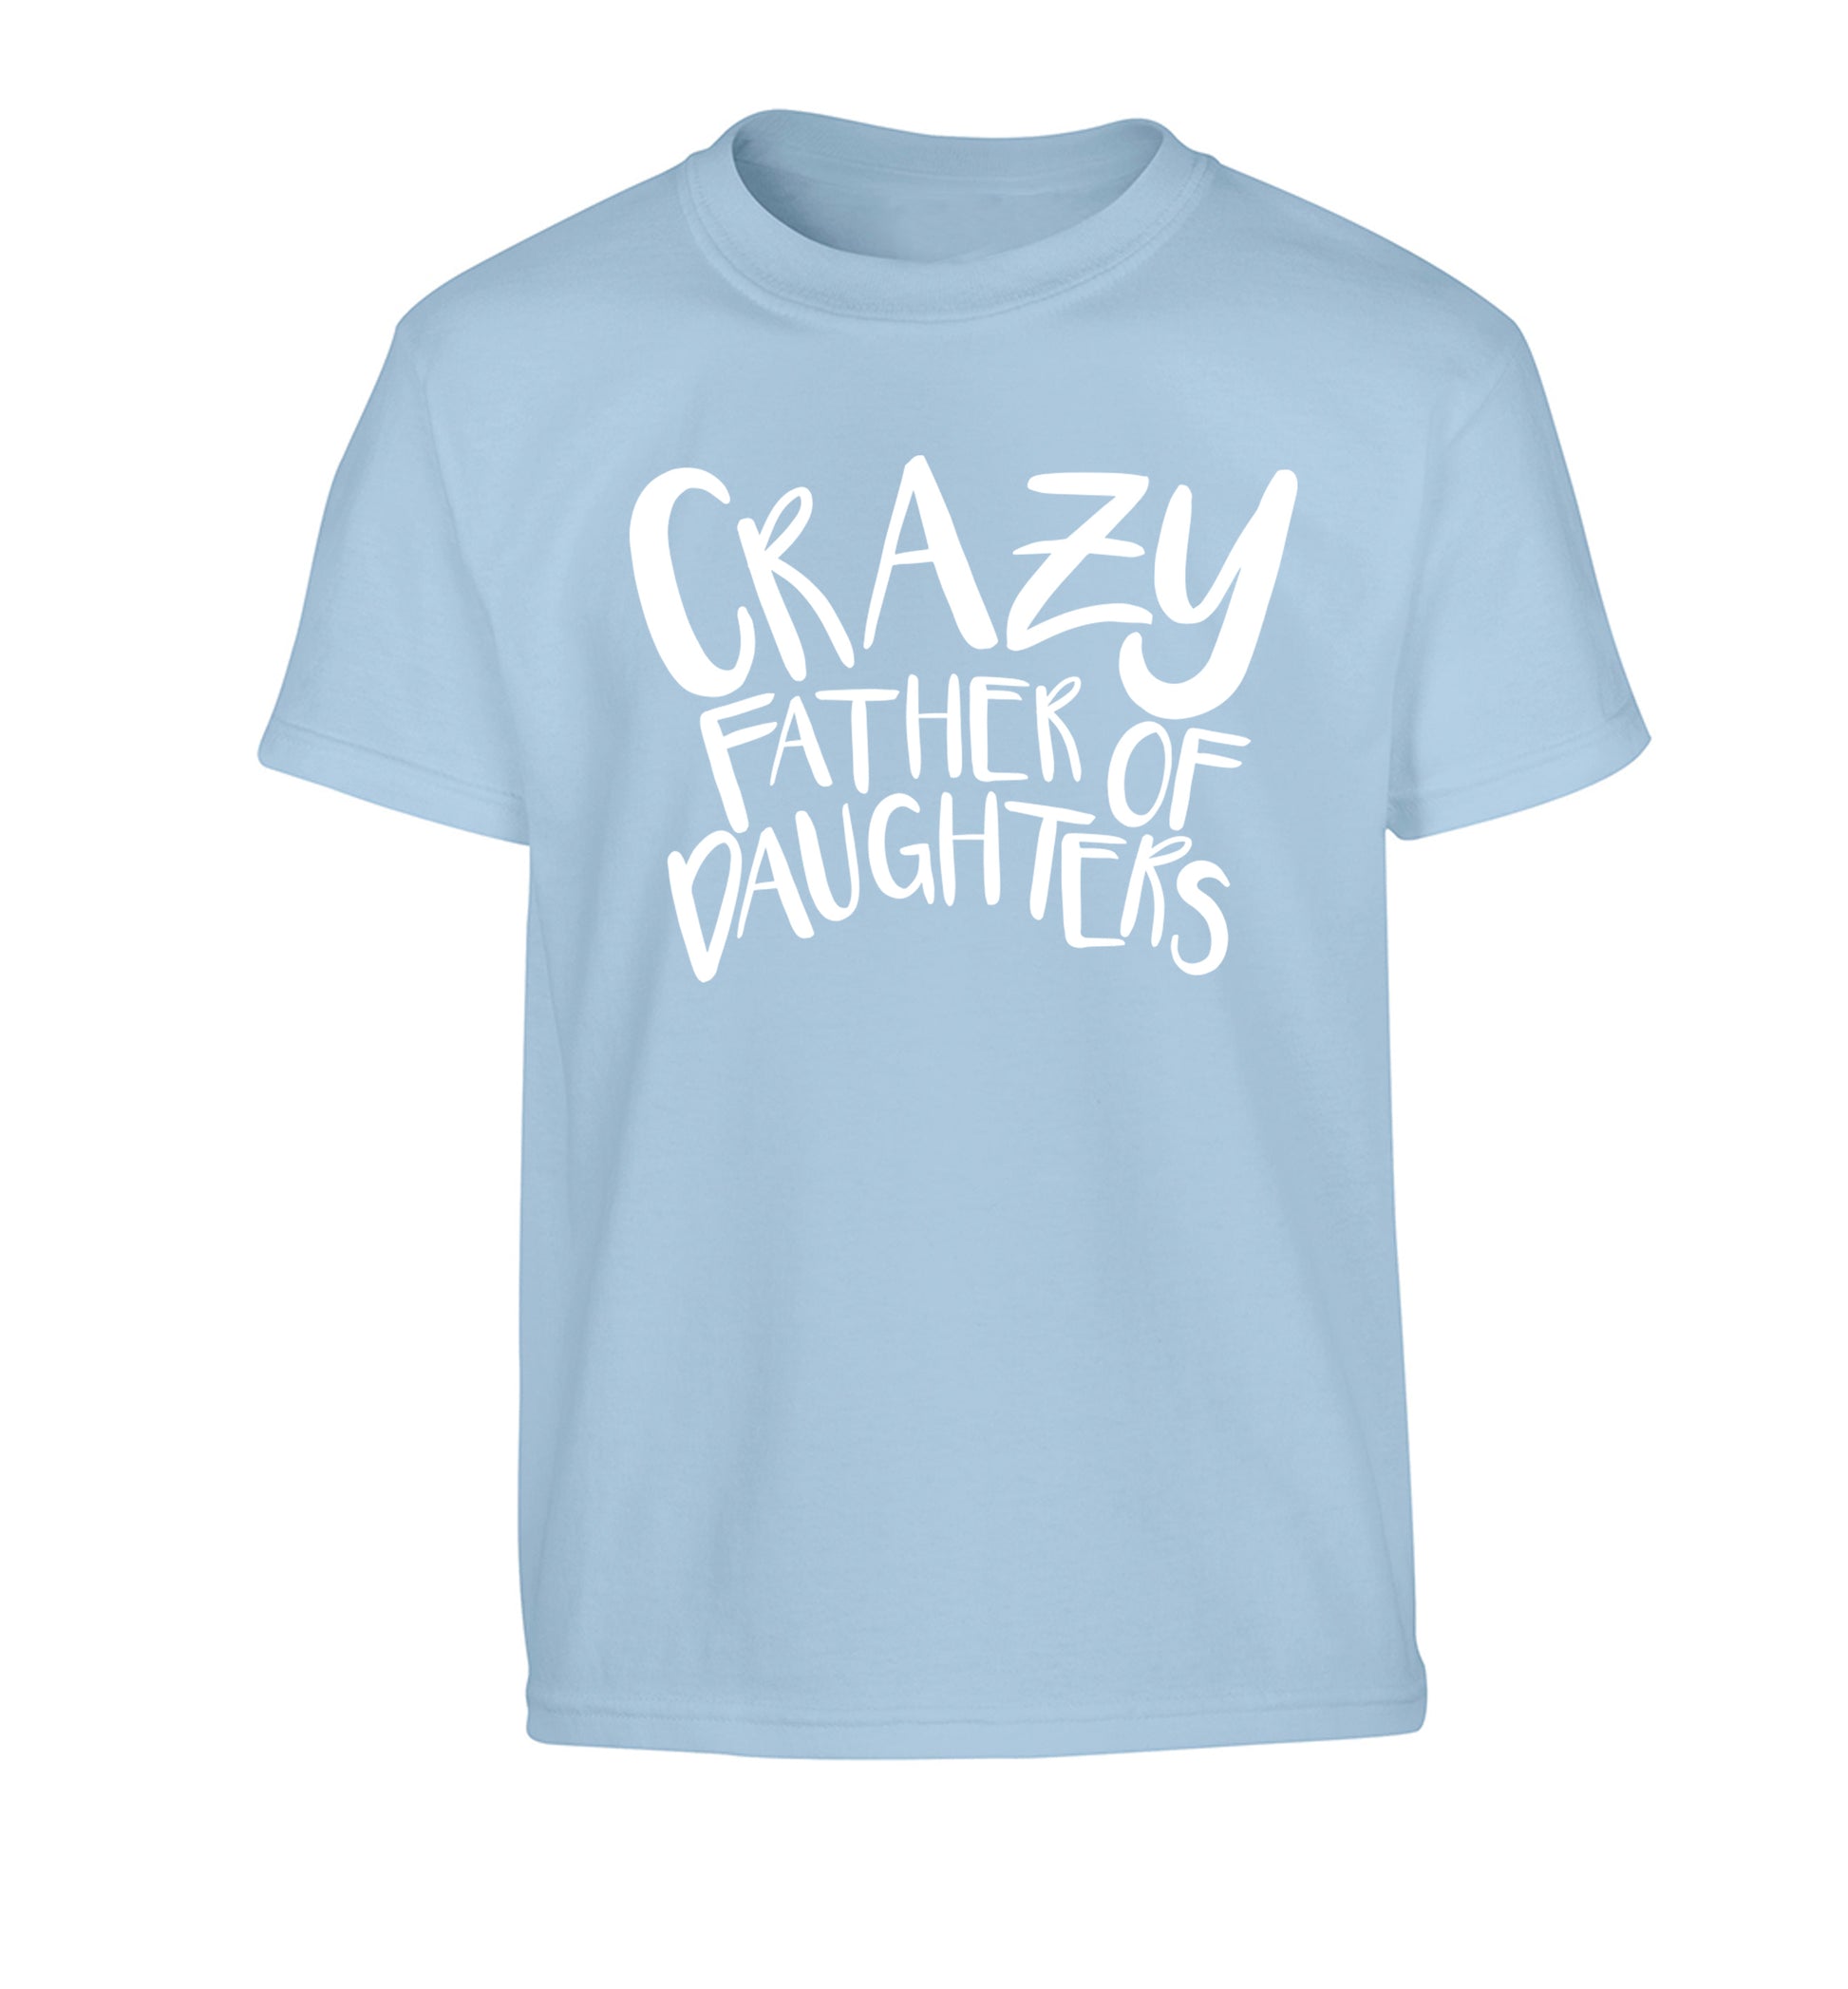 Crazy father of daughters Children's light blue Tshirt 12-13 Years